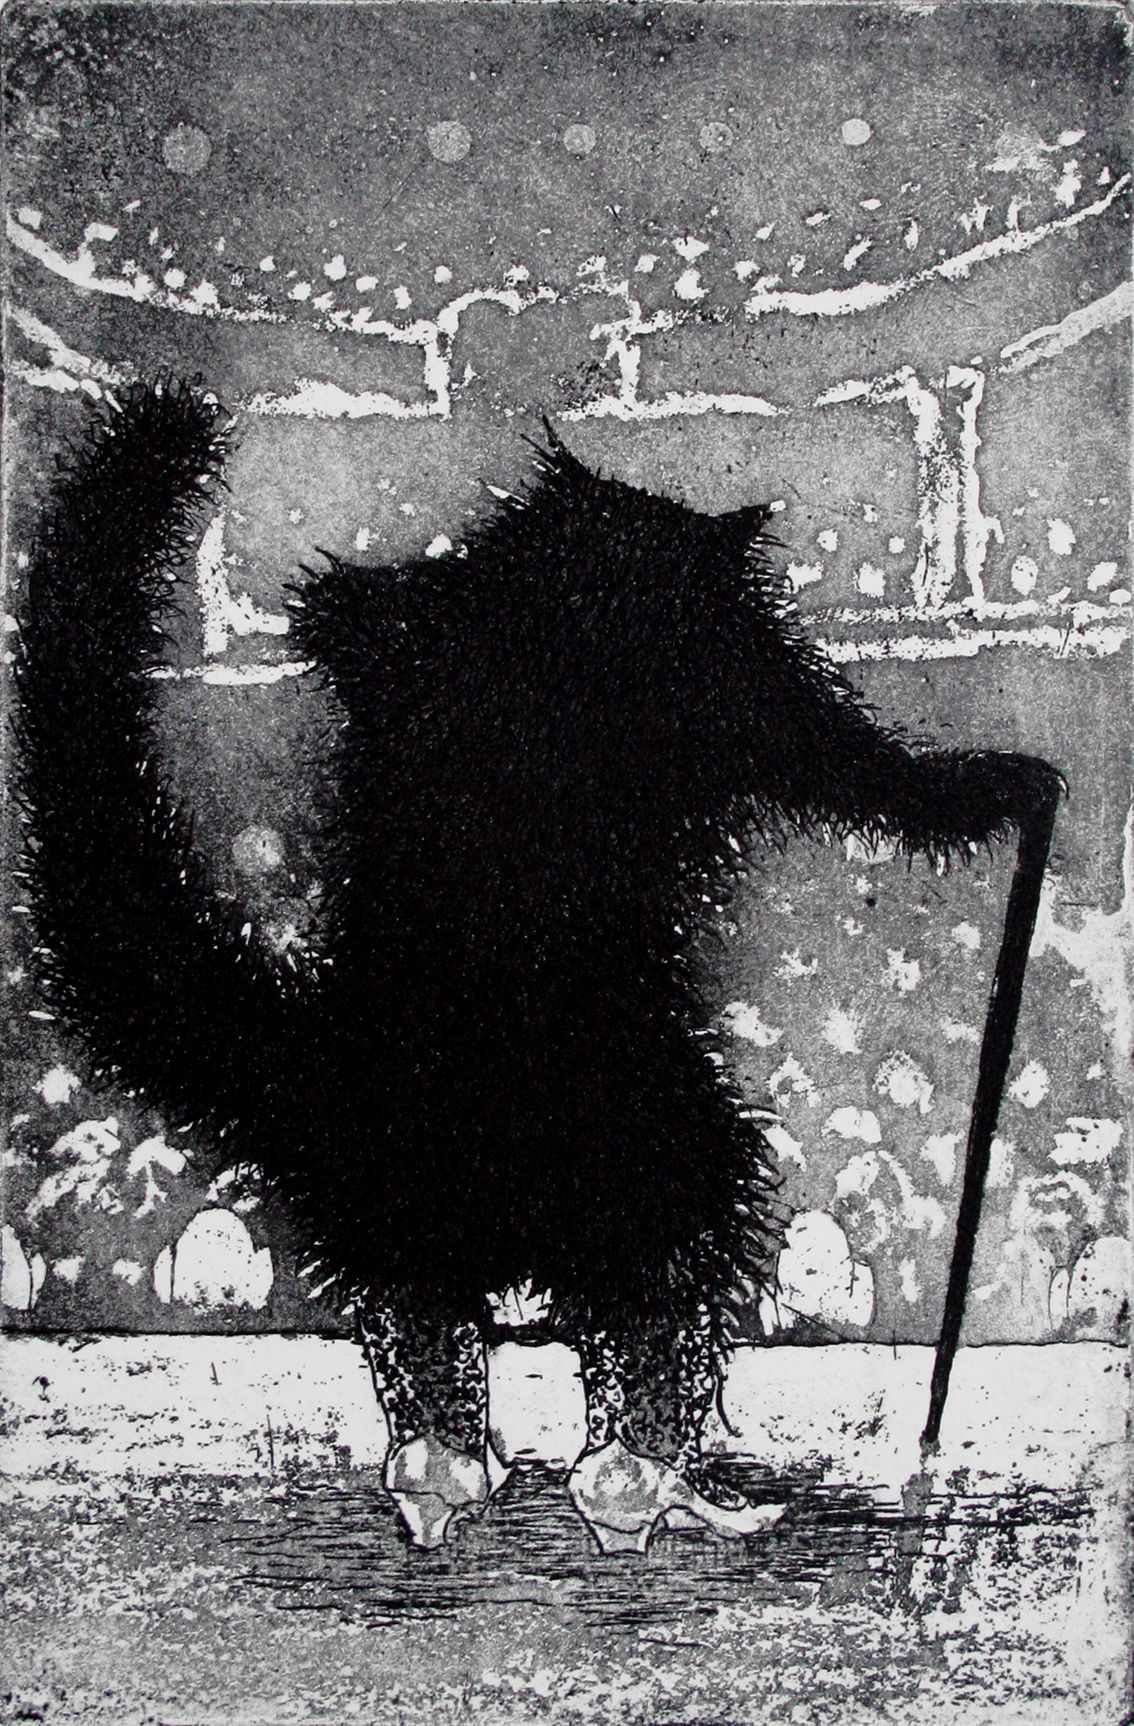 Old Puss in Boots by Tim Southall